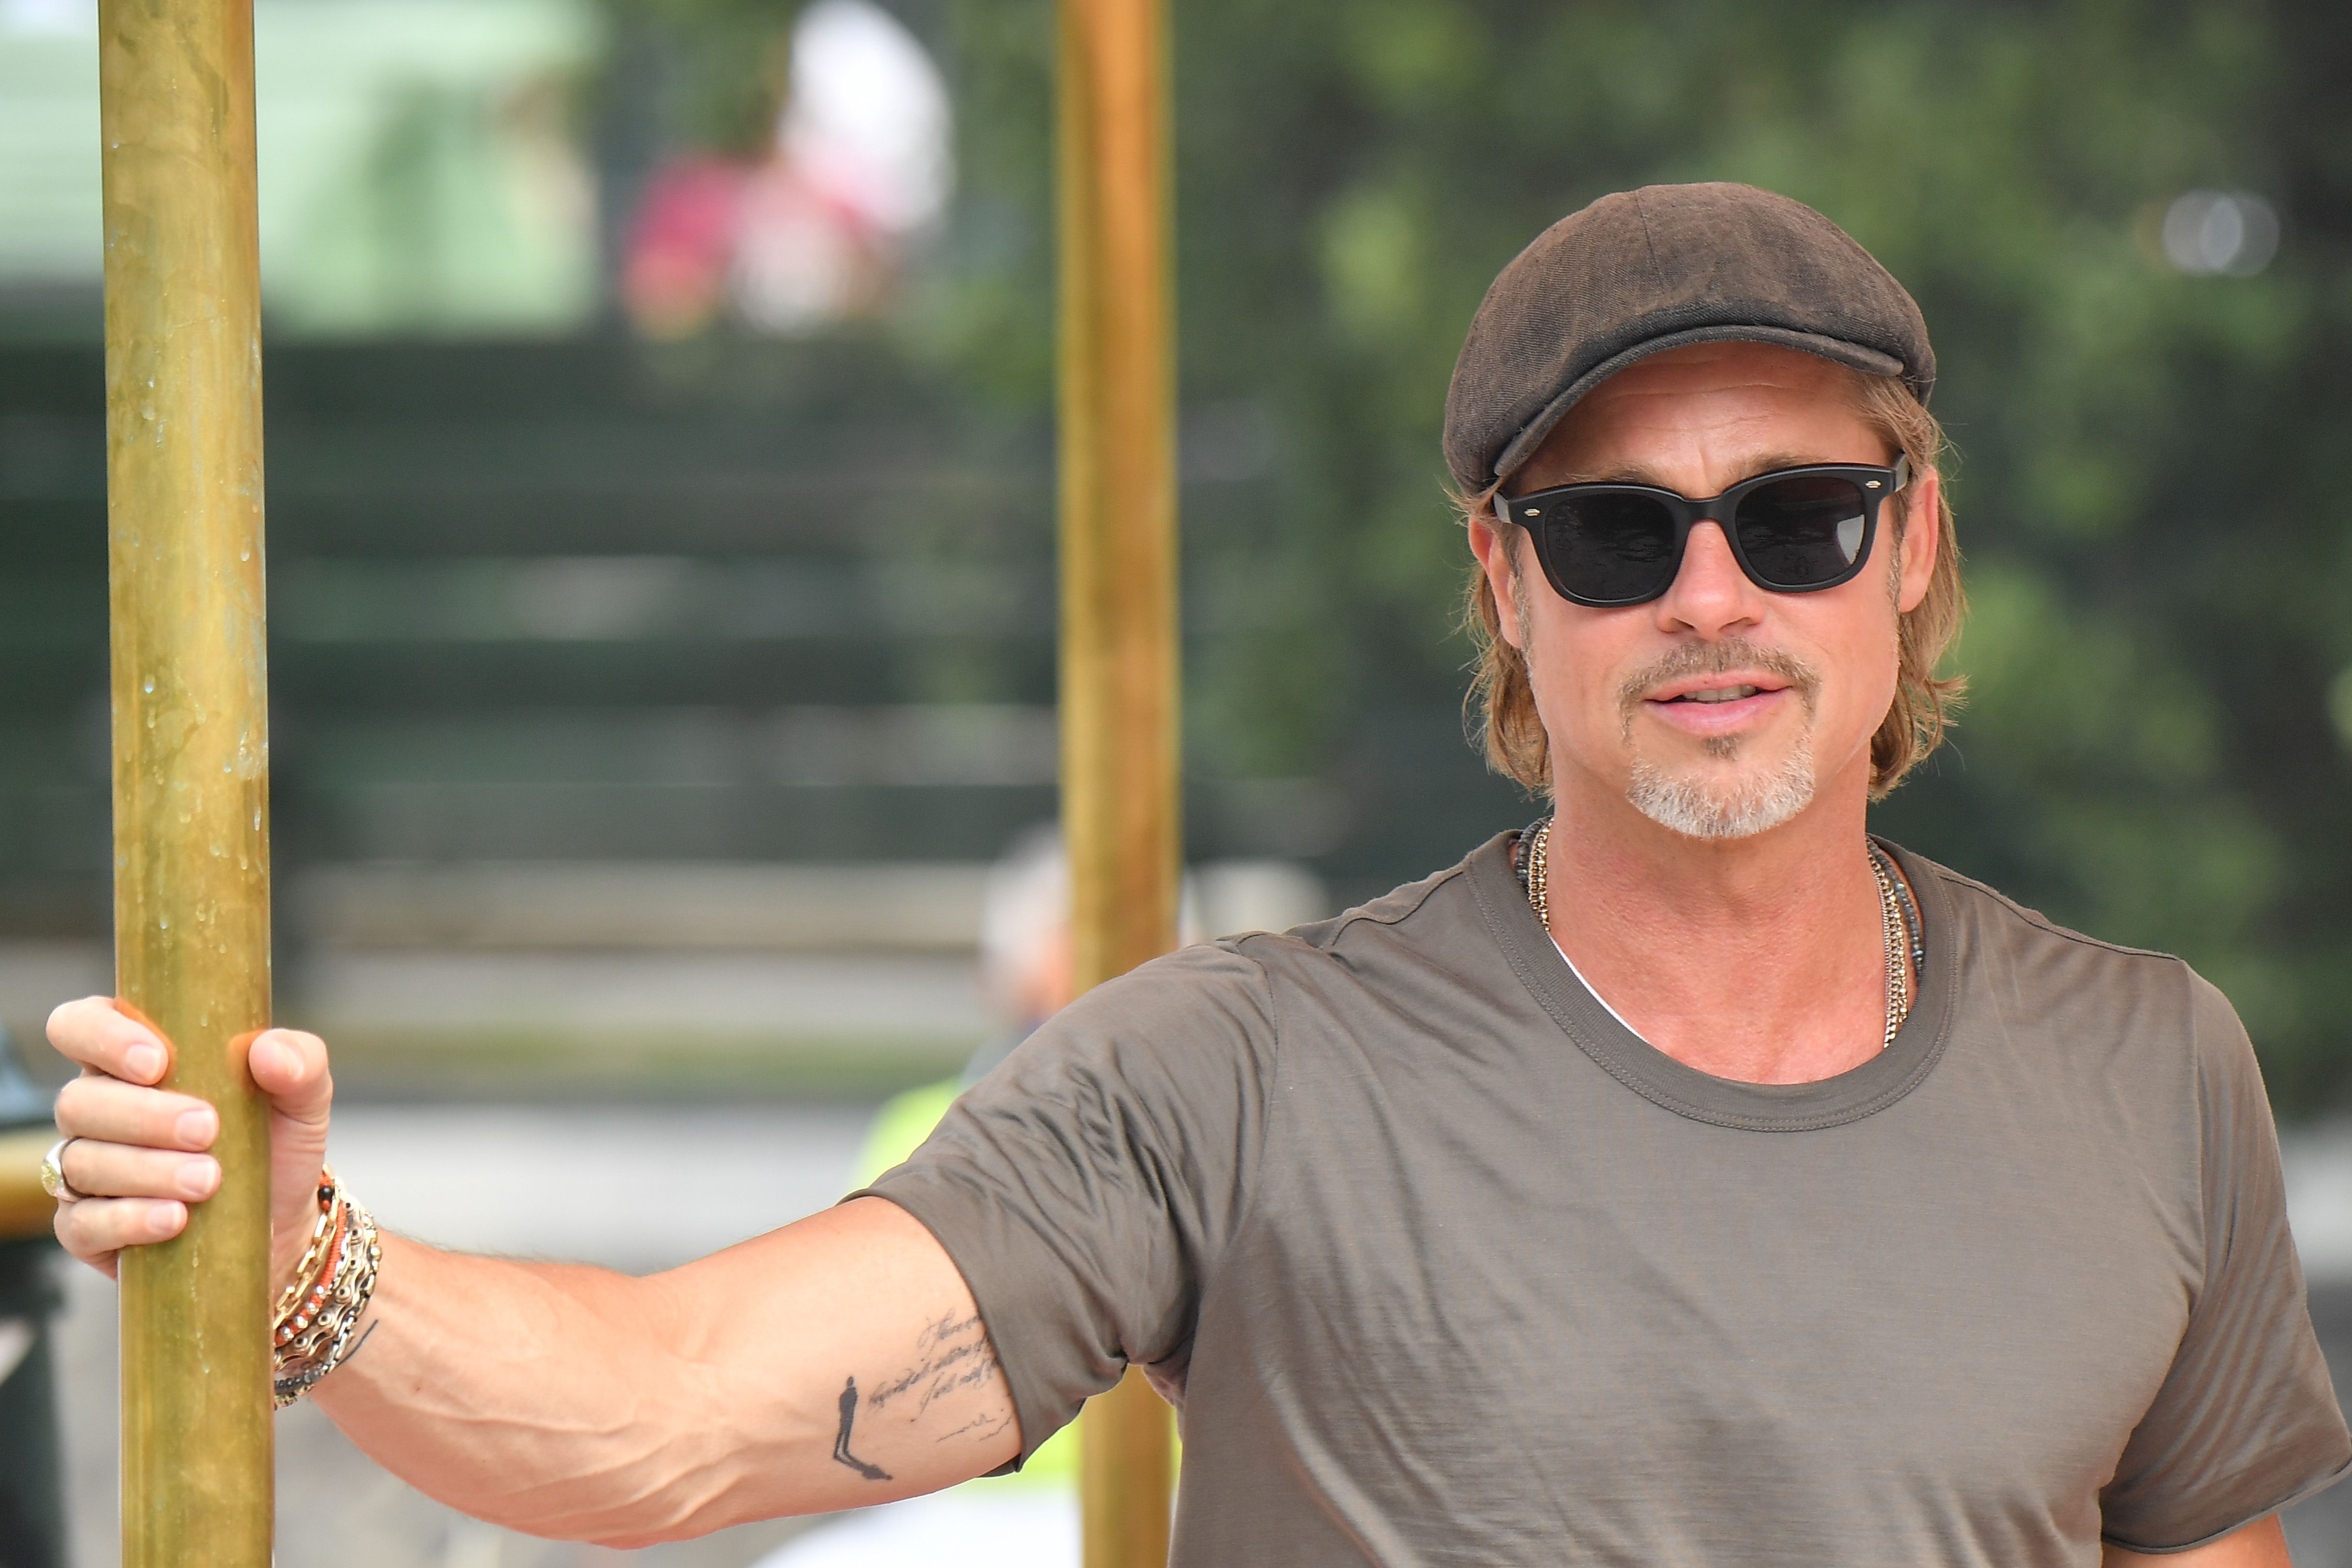 What Is Brad Pitt's New Arm Tattoo? The Meaning of His New Ink.